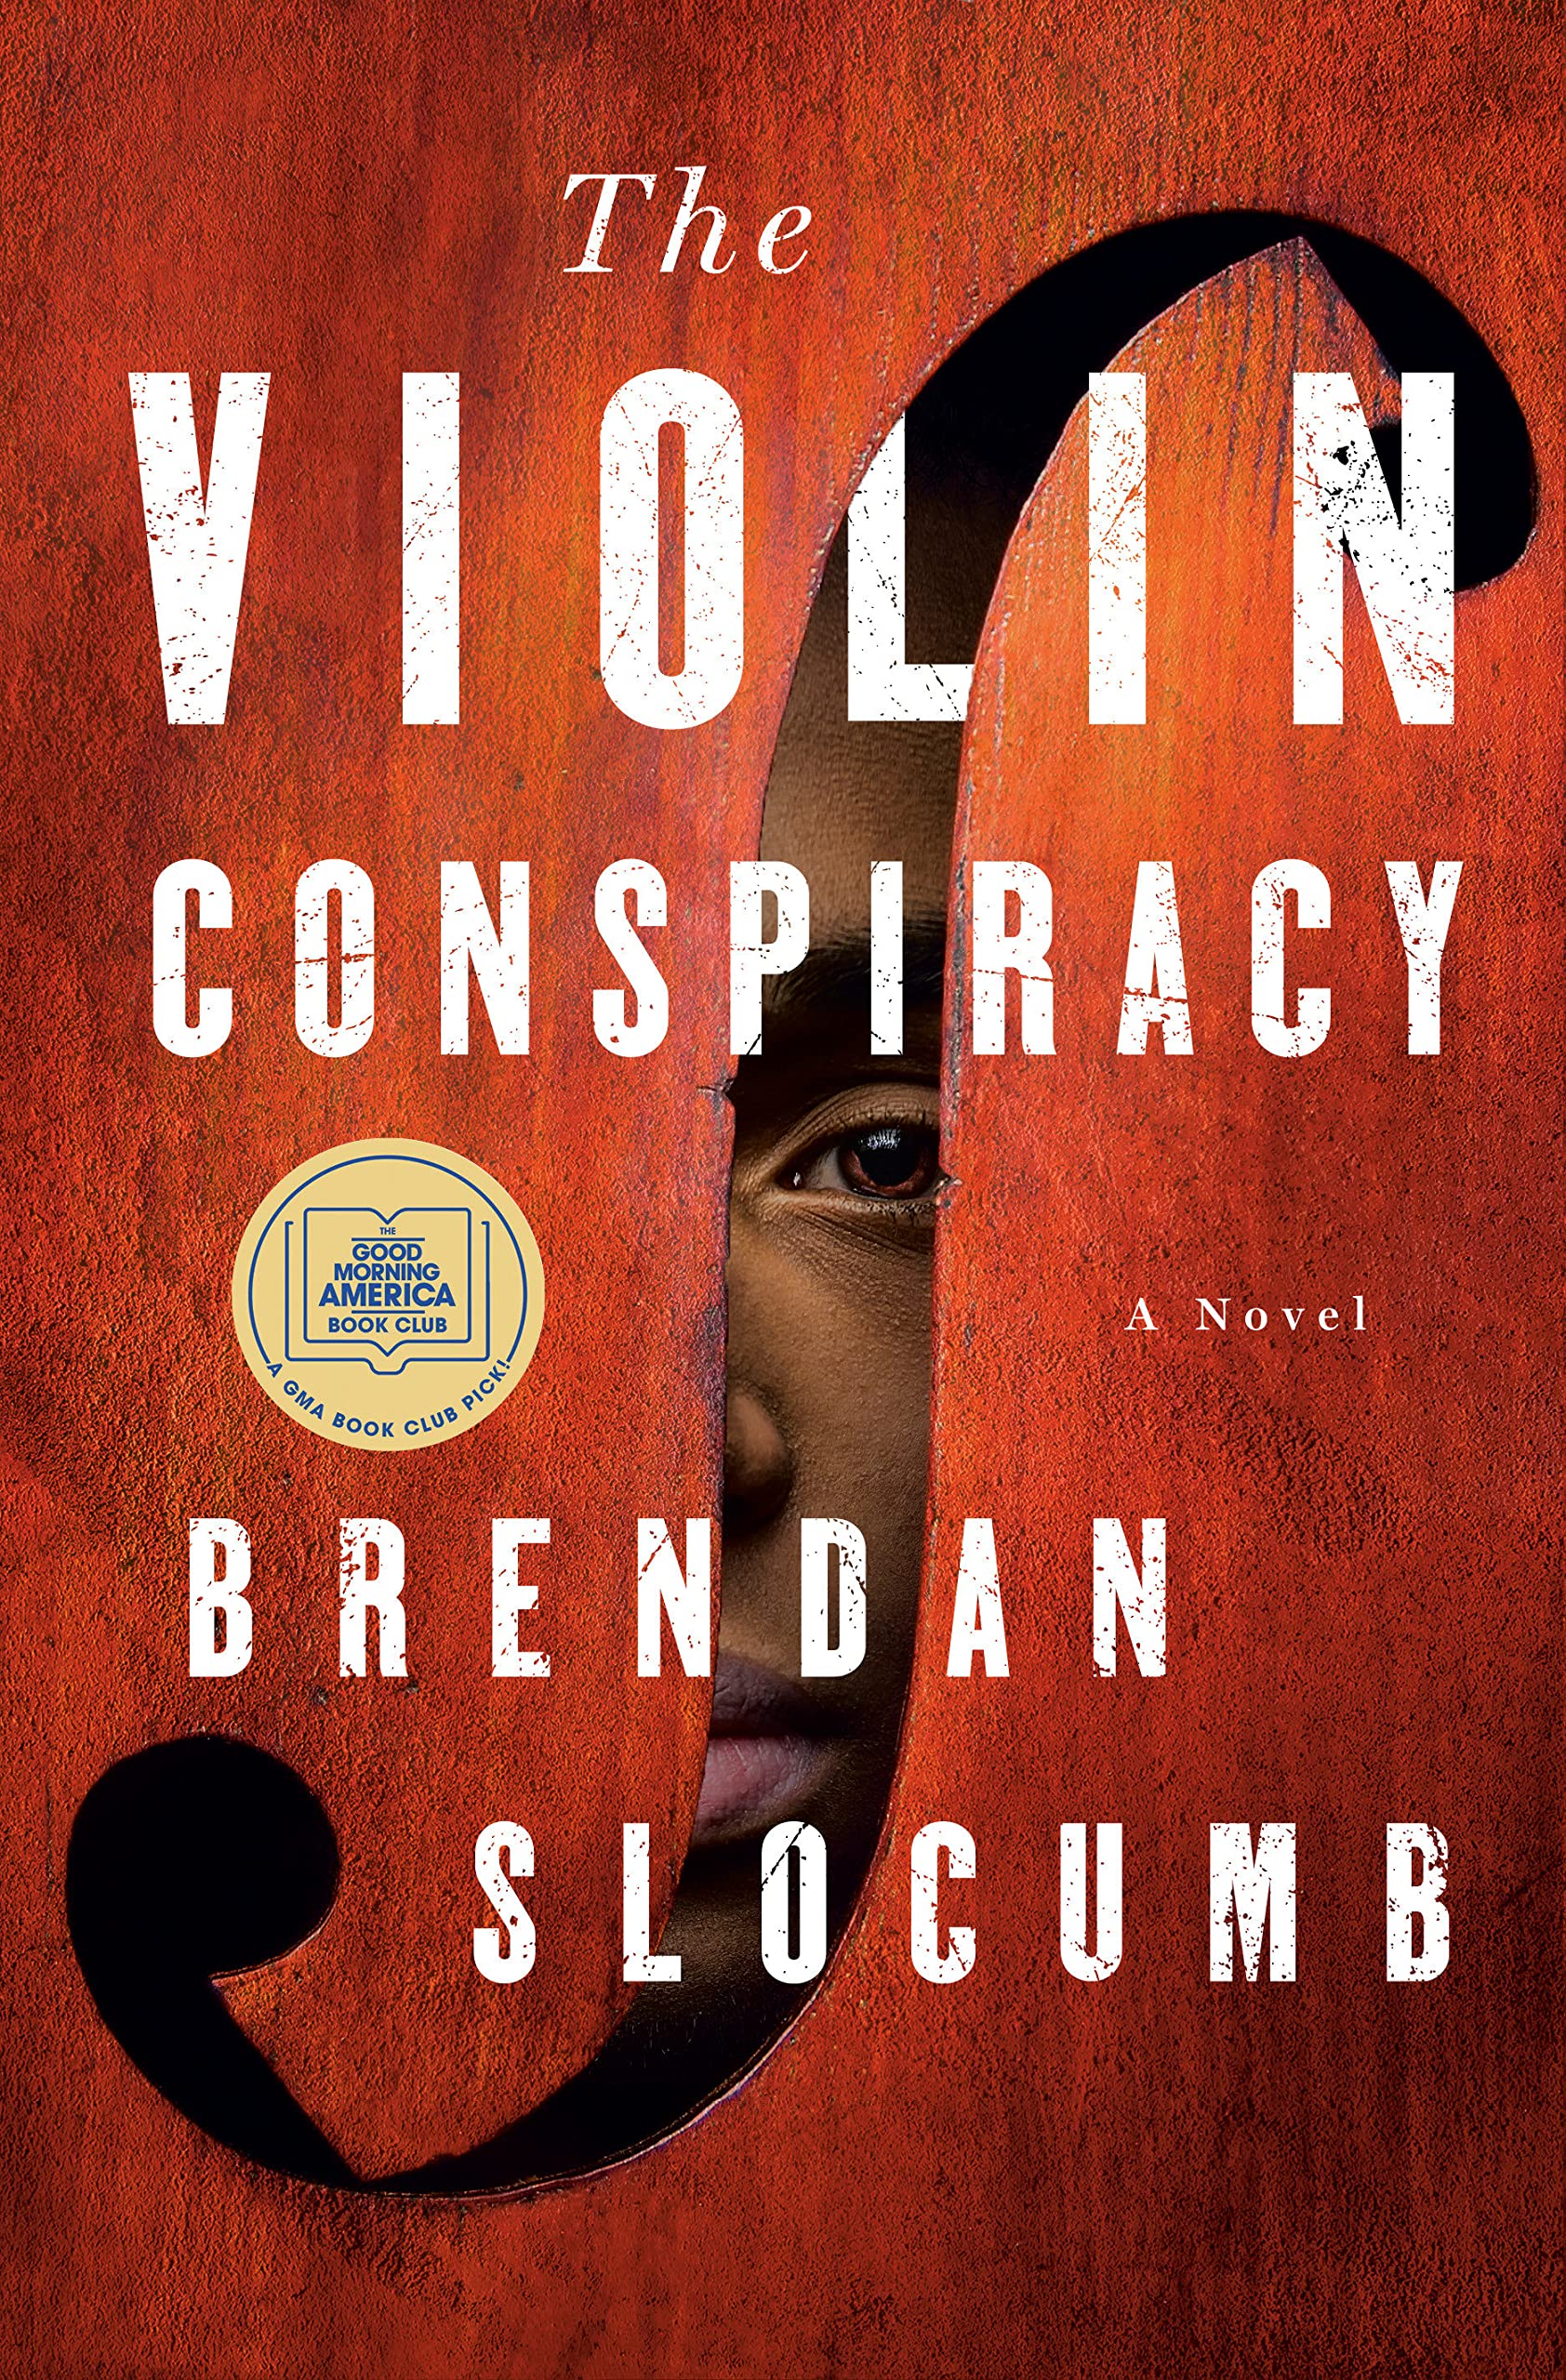 The Violin Conspiracy Hardcover by Brendan Slocumb